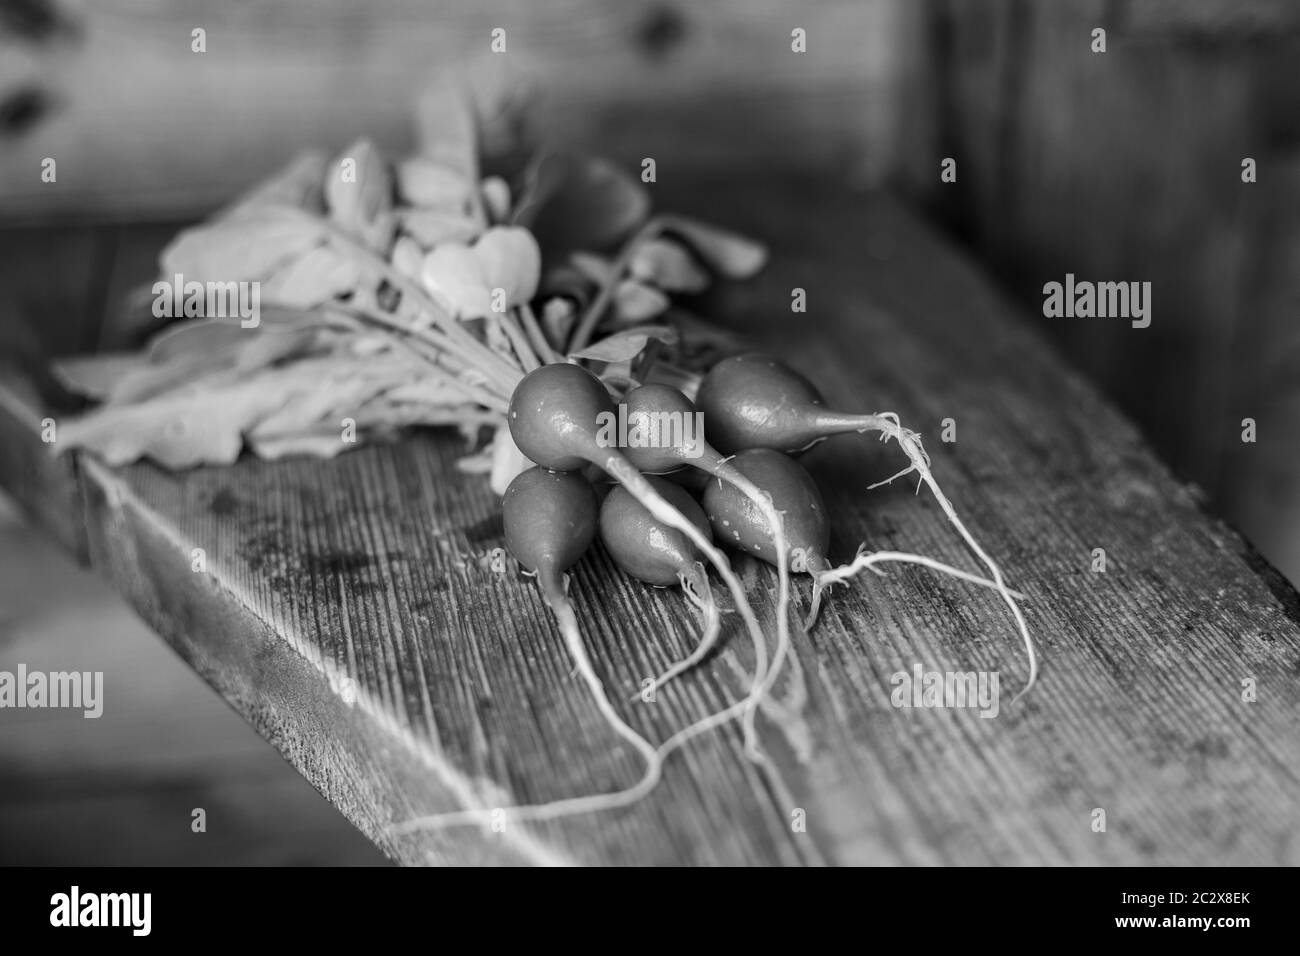 Red radish on a wooden table. Red vegetable with green leaves. Stock Photo